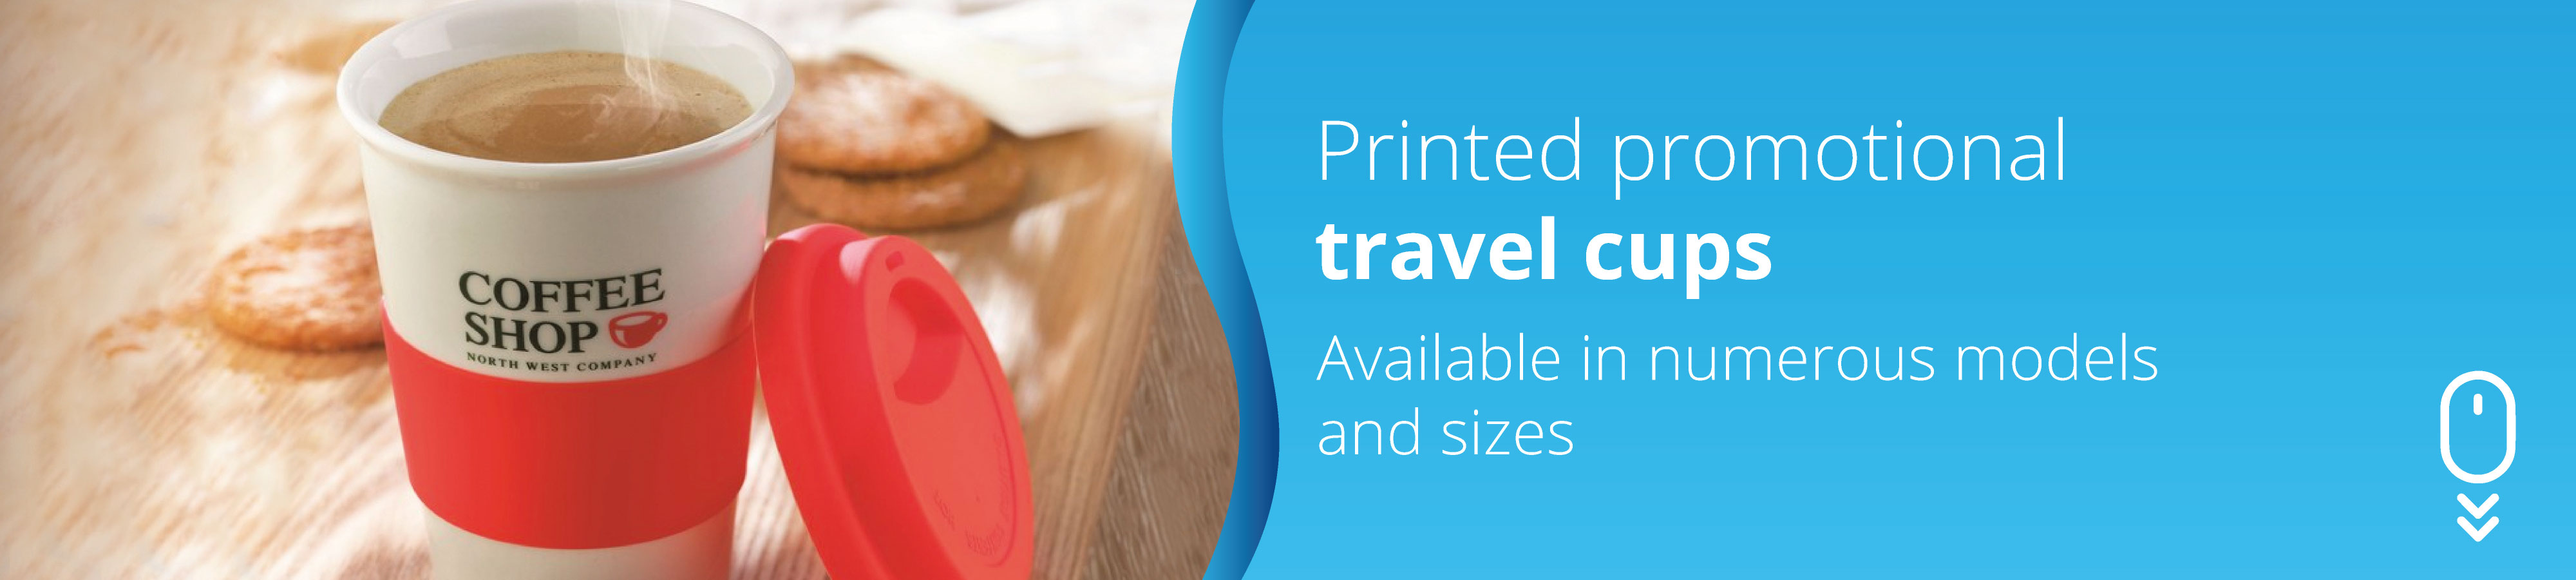 Travel-cups-with-print-design